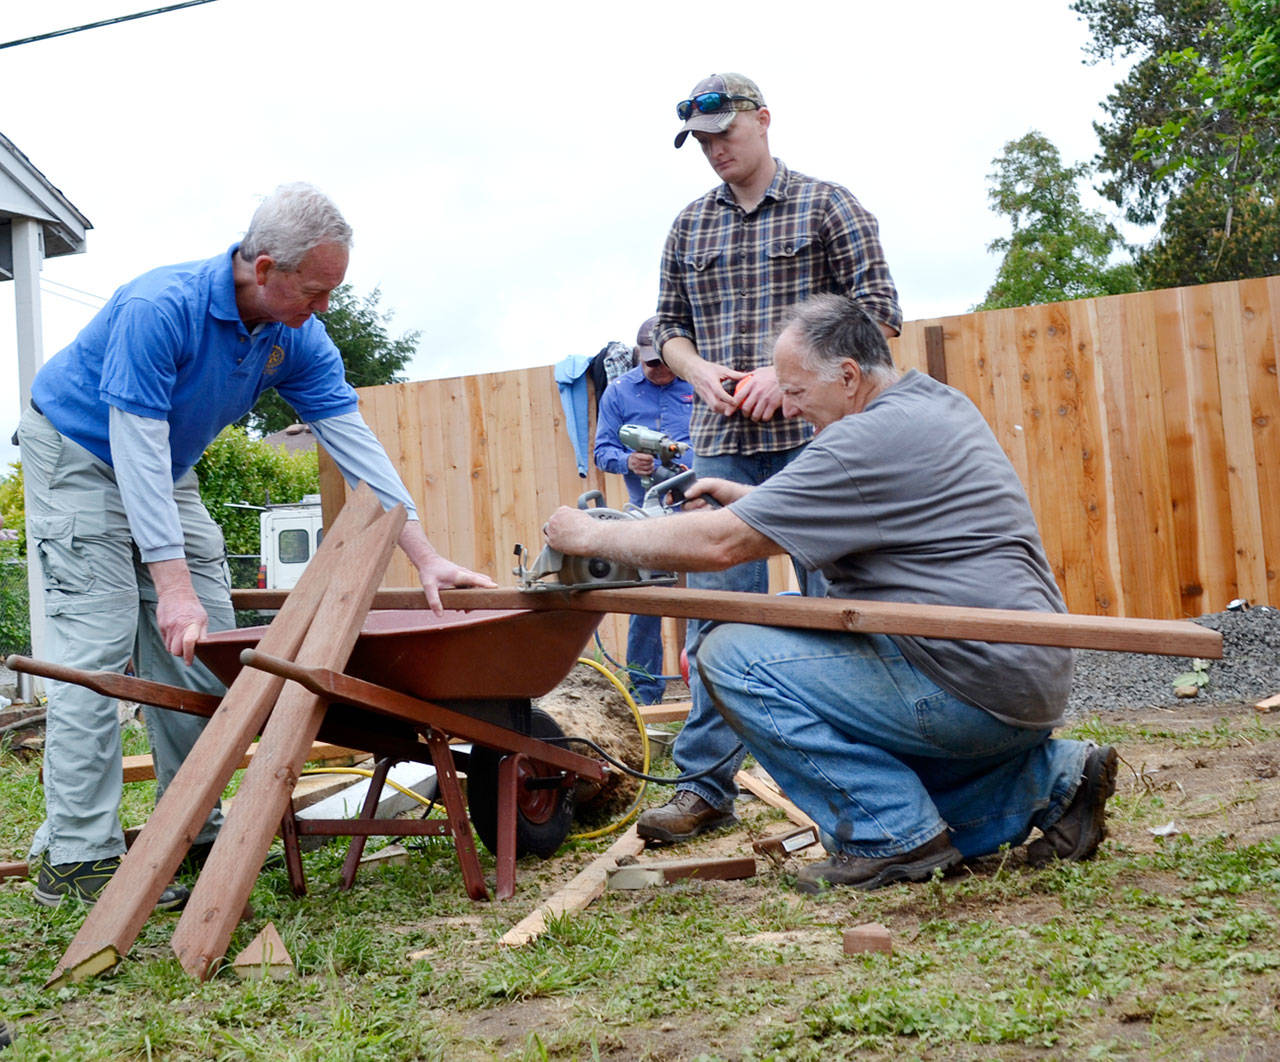 Volunteers from left, Doug Davis, Olin Darby, and John Ketchum, prepare pieces of wood for new fencing at a home in Sequim as part of a Neighborhood Revitalization plan from Habitat for Humanity of Clallam County in 2016. Now the City of Sequim and Habitat partner for Service Fest 2018 this June seeking similar projects from homeowners in city limits. Sequim Gazette file photo by Matthew Nash